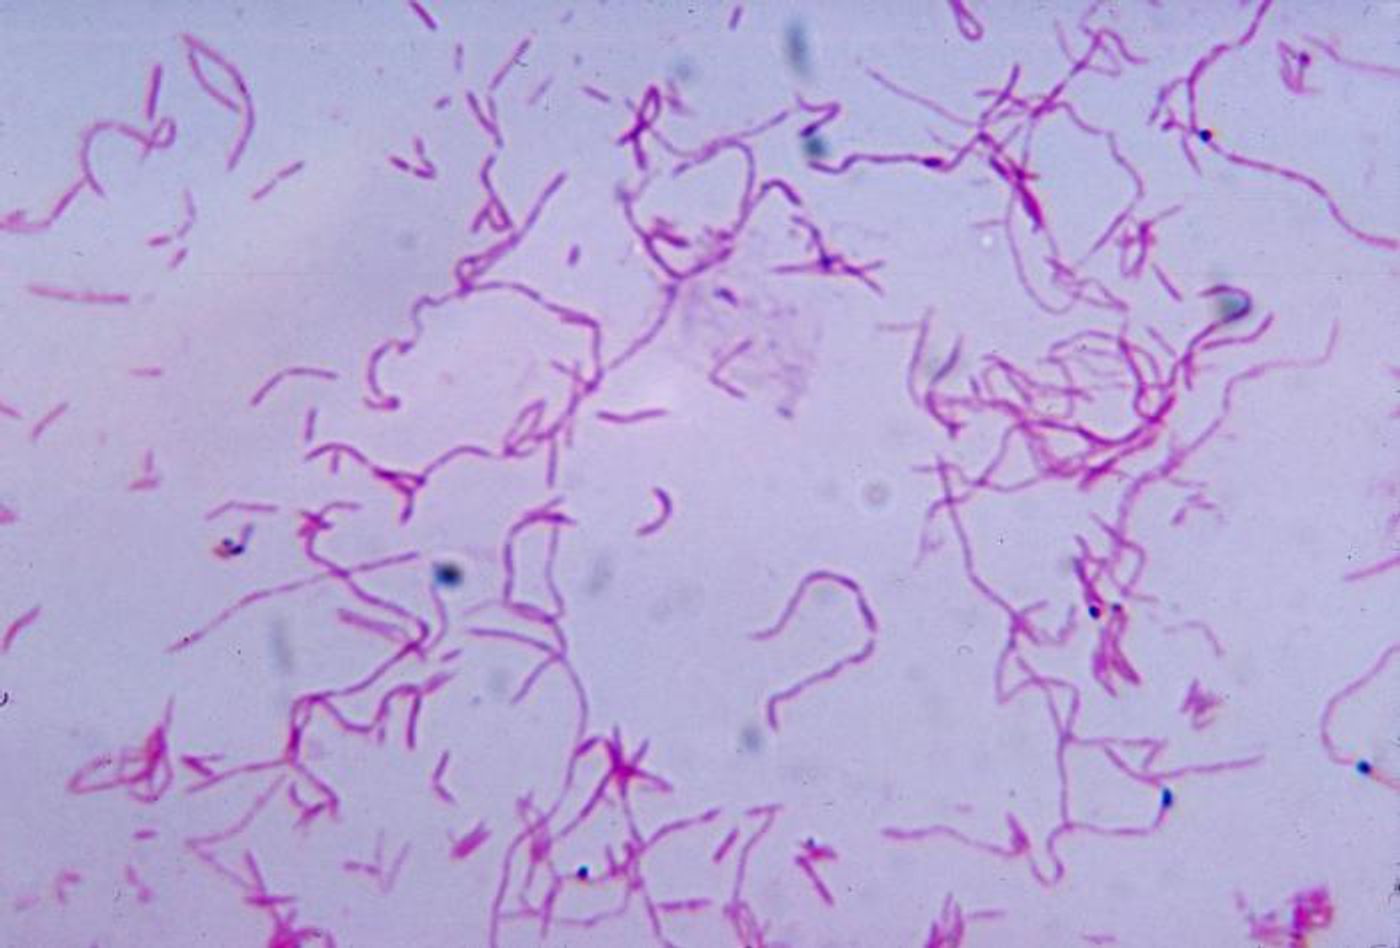 Fusobacterium nucleatum / Credit: Centers for Disease Control and Prevention